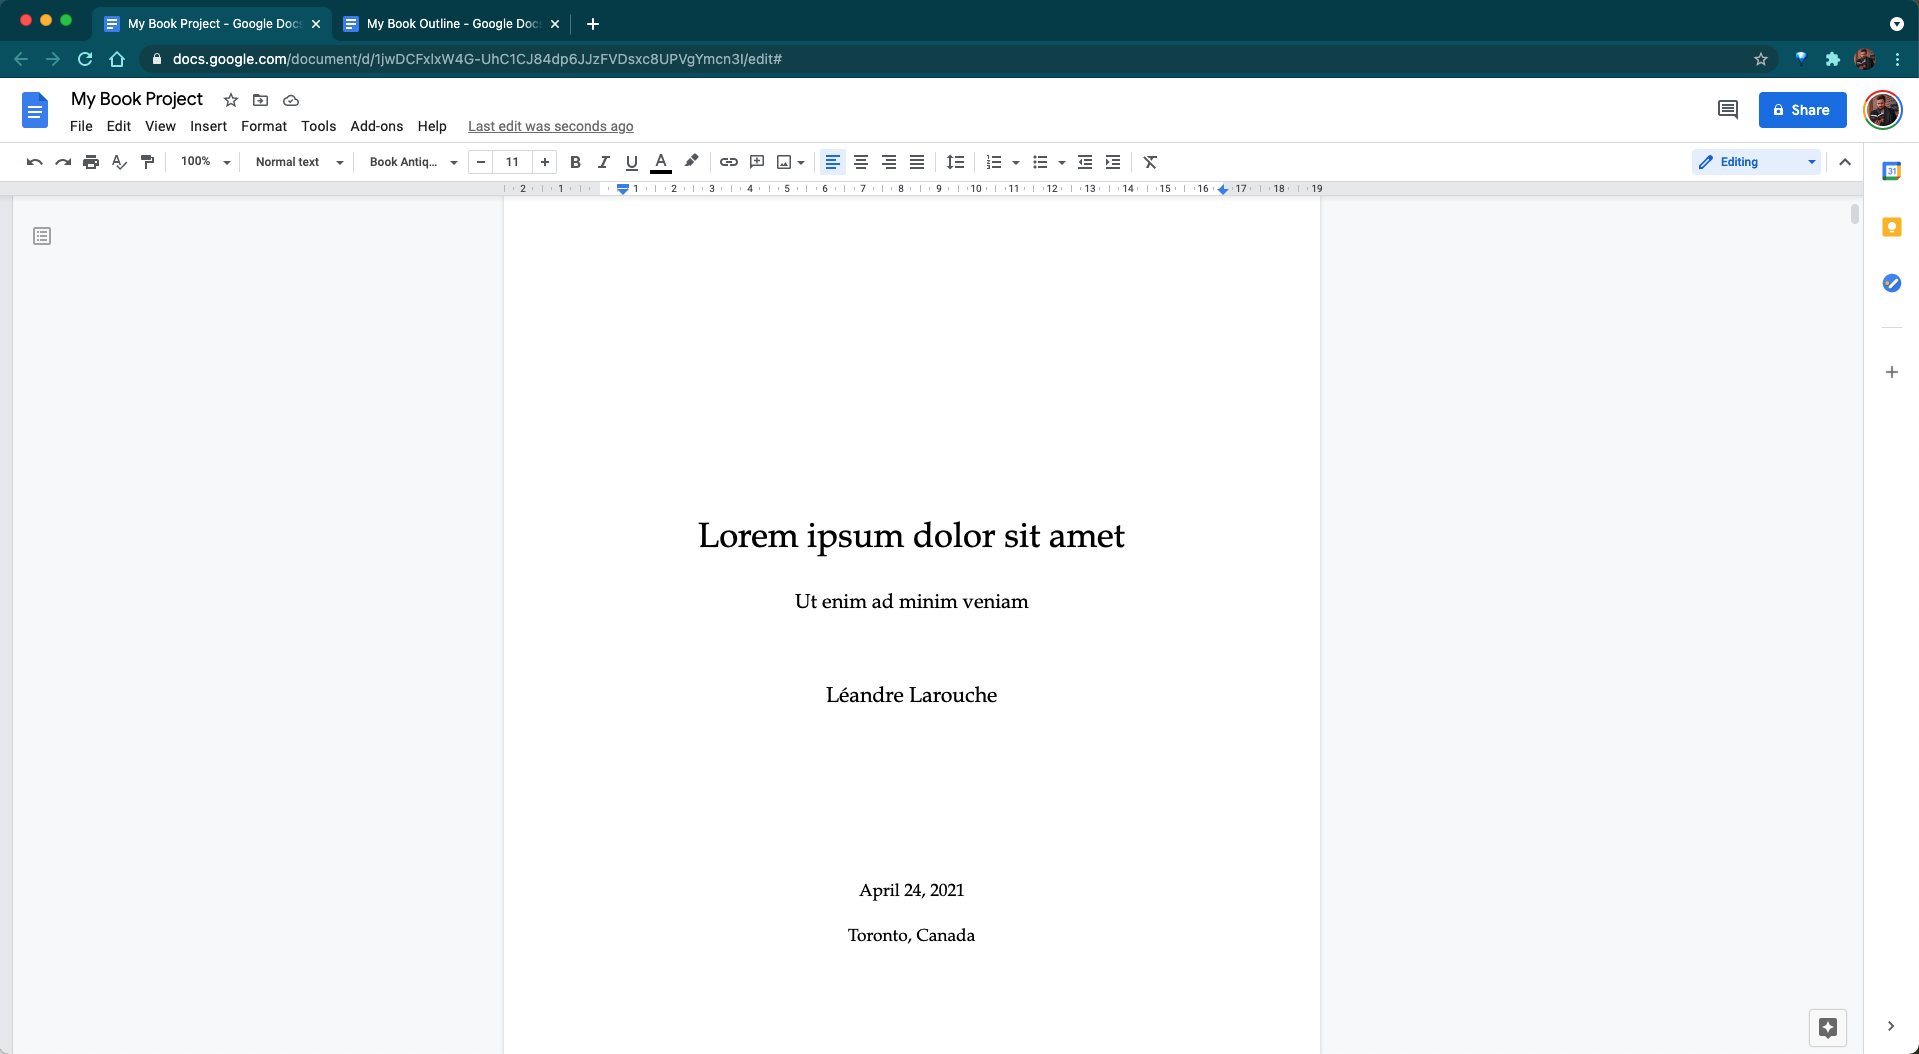 Your book's title page in Google Docs